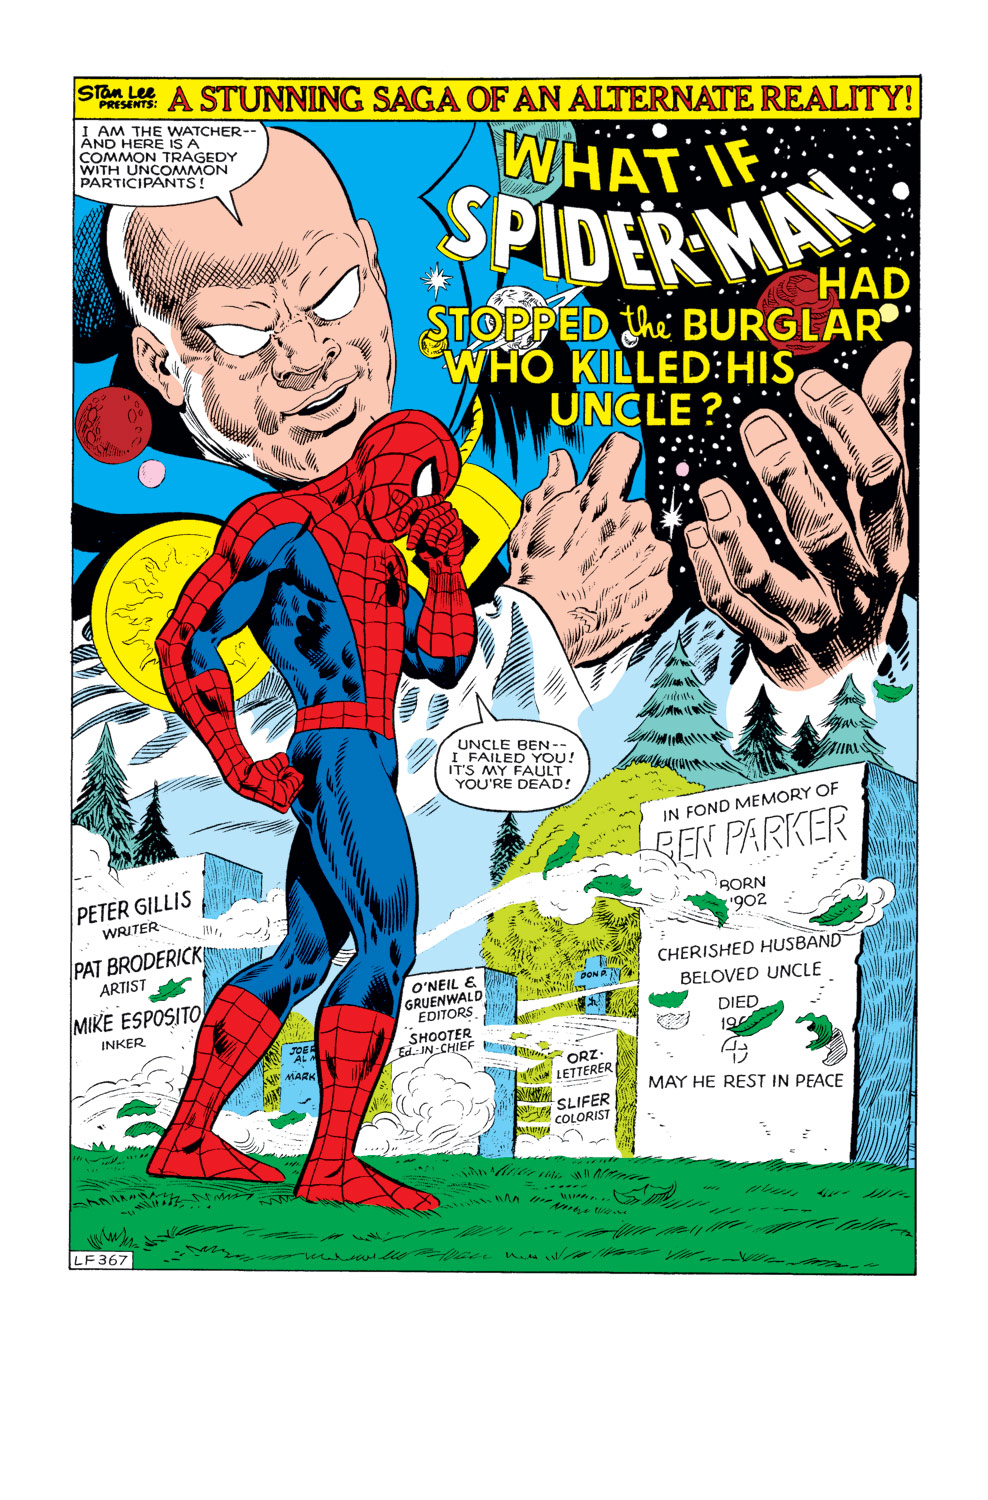 What If? (1977) issue 19 - Spider-Man had never become a crimefighter - Page 2